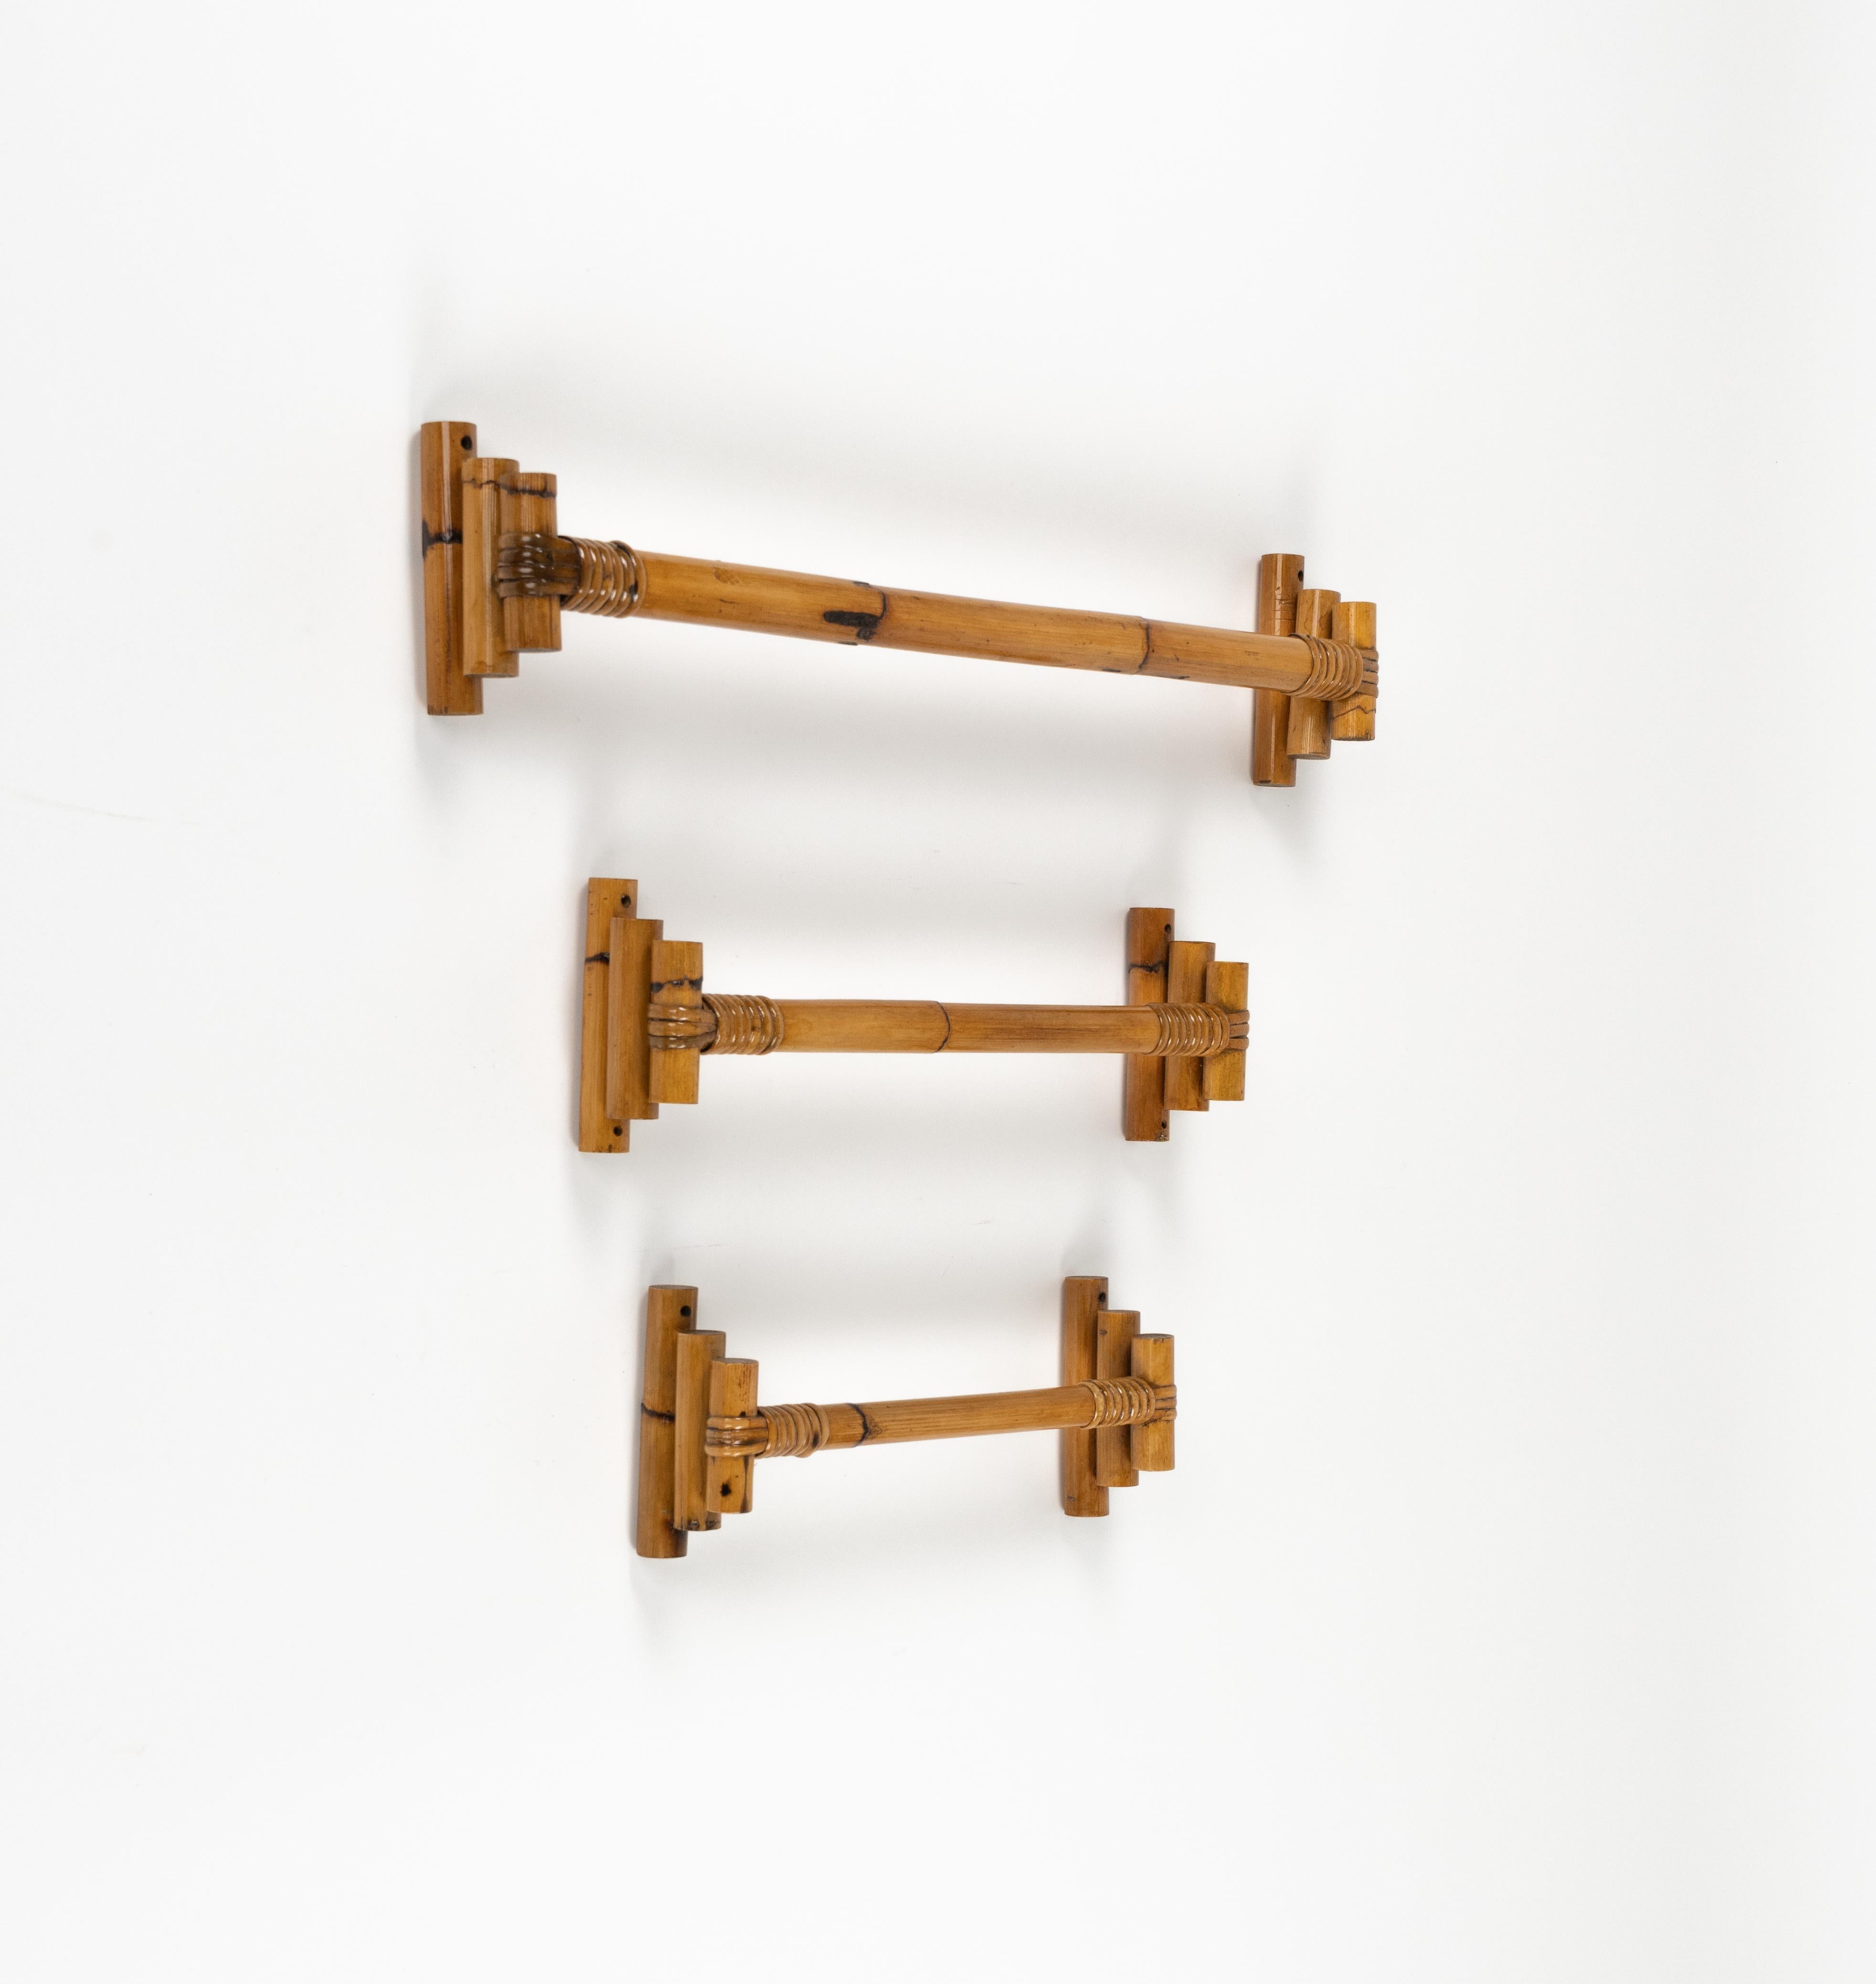 Italian Midcentury Bathroom Set of Three Towel Holder in Bamboo and Rattan, Italy 1970s For Sale